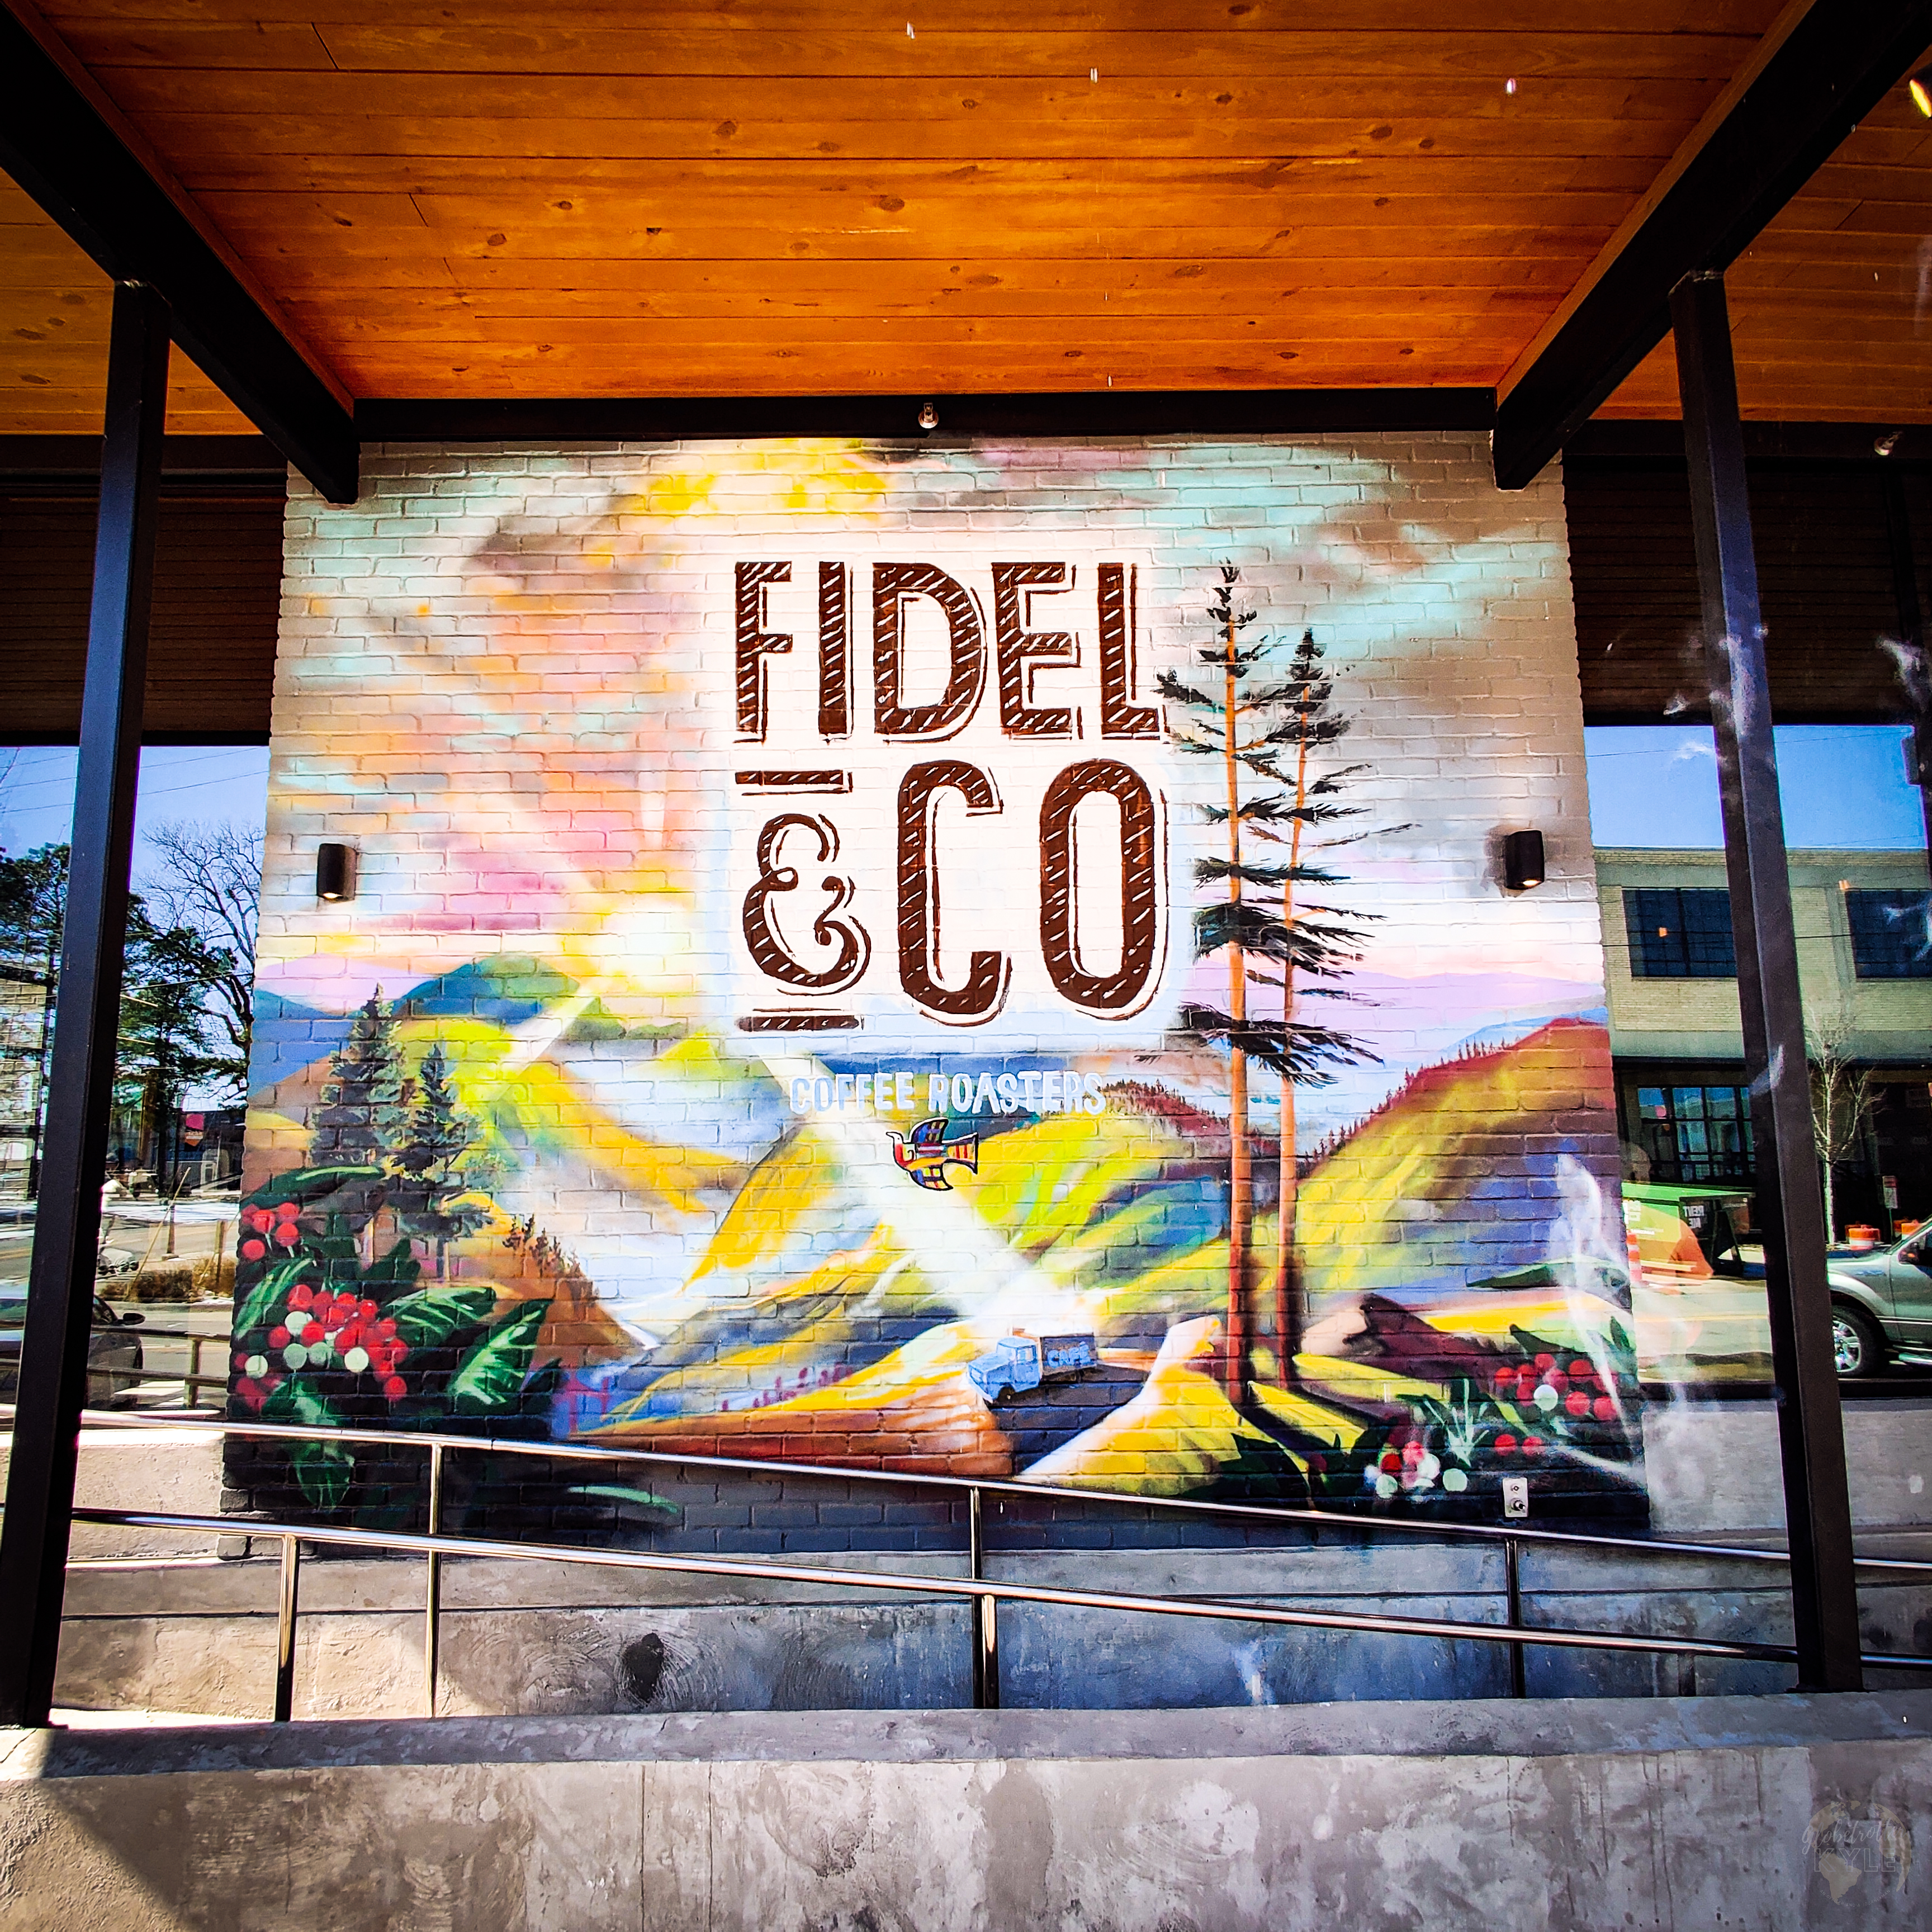 a bright colored mural with mountains trees and hills for Fidel & Co coffee roasters in little rock arkansas